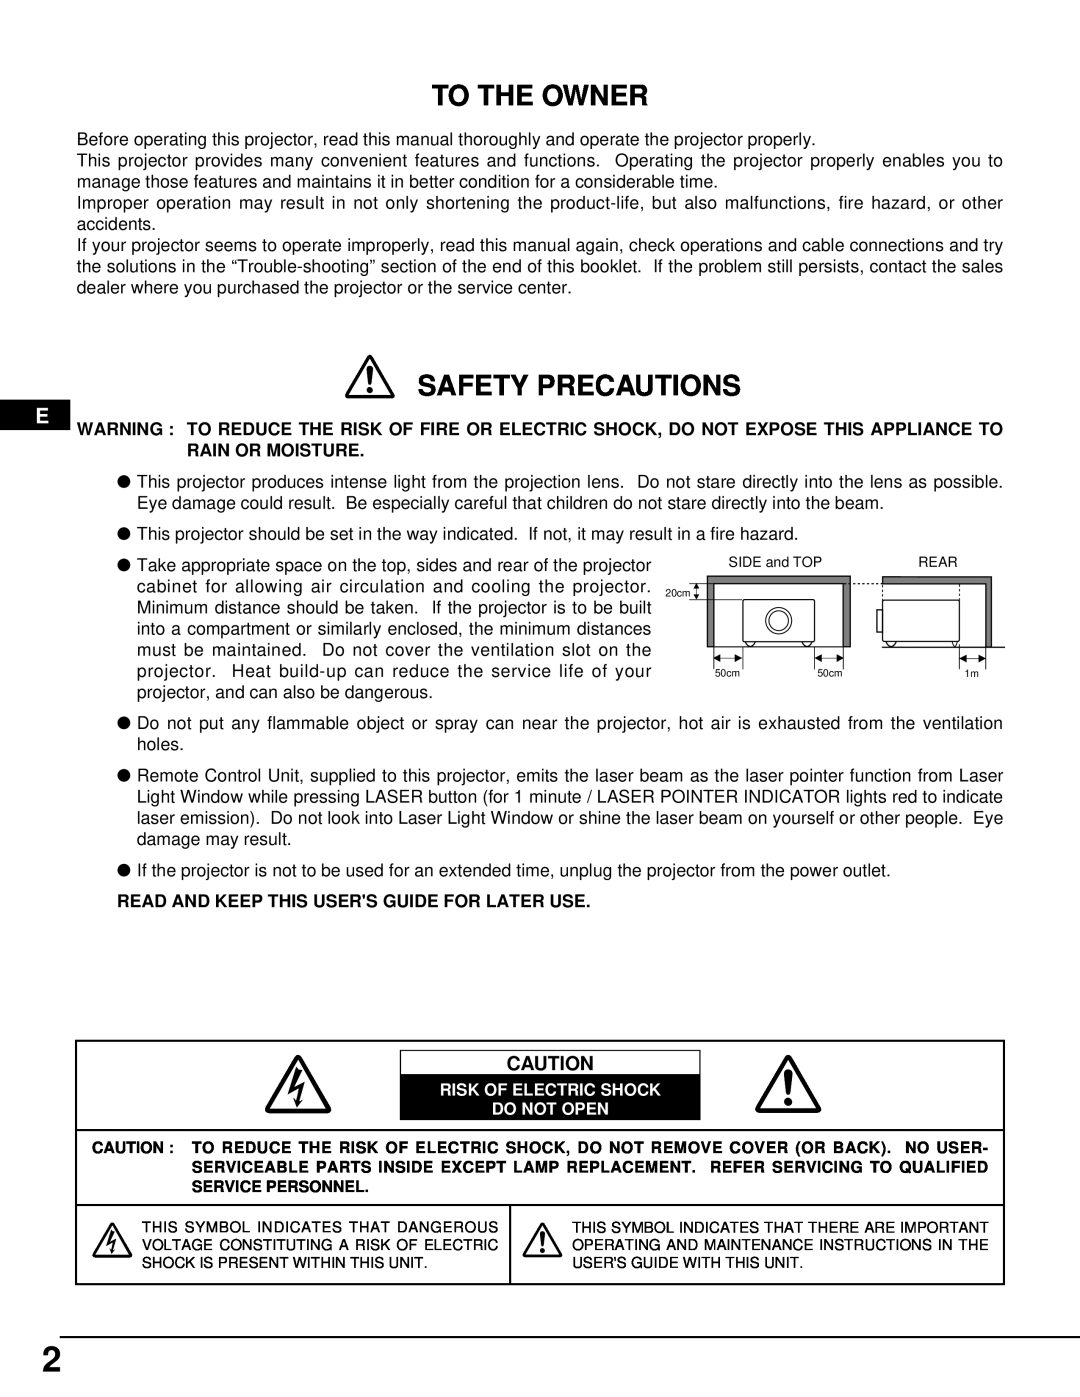 Dukane 28A9058, 28A8945 manual To The Owner, Safety Precautions 